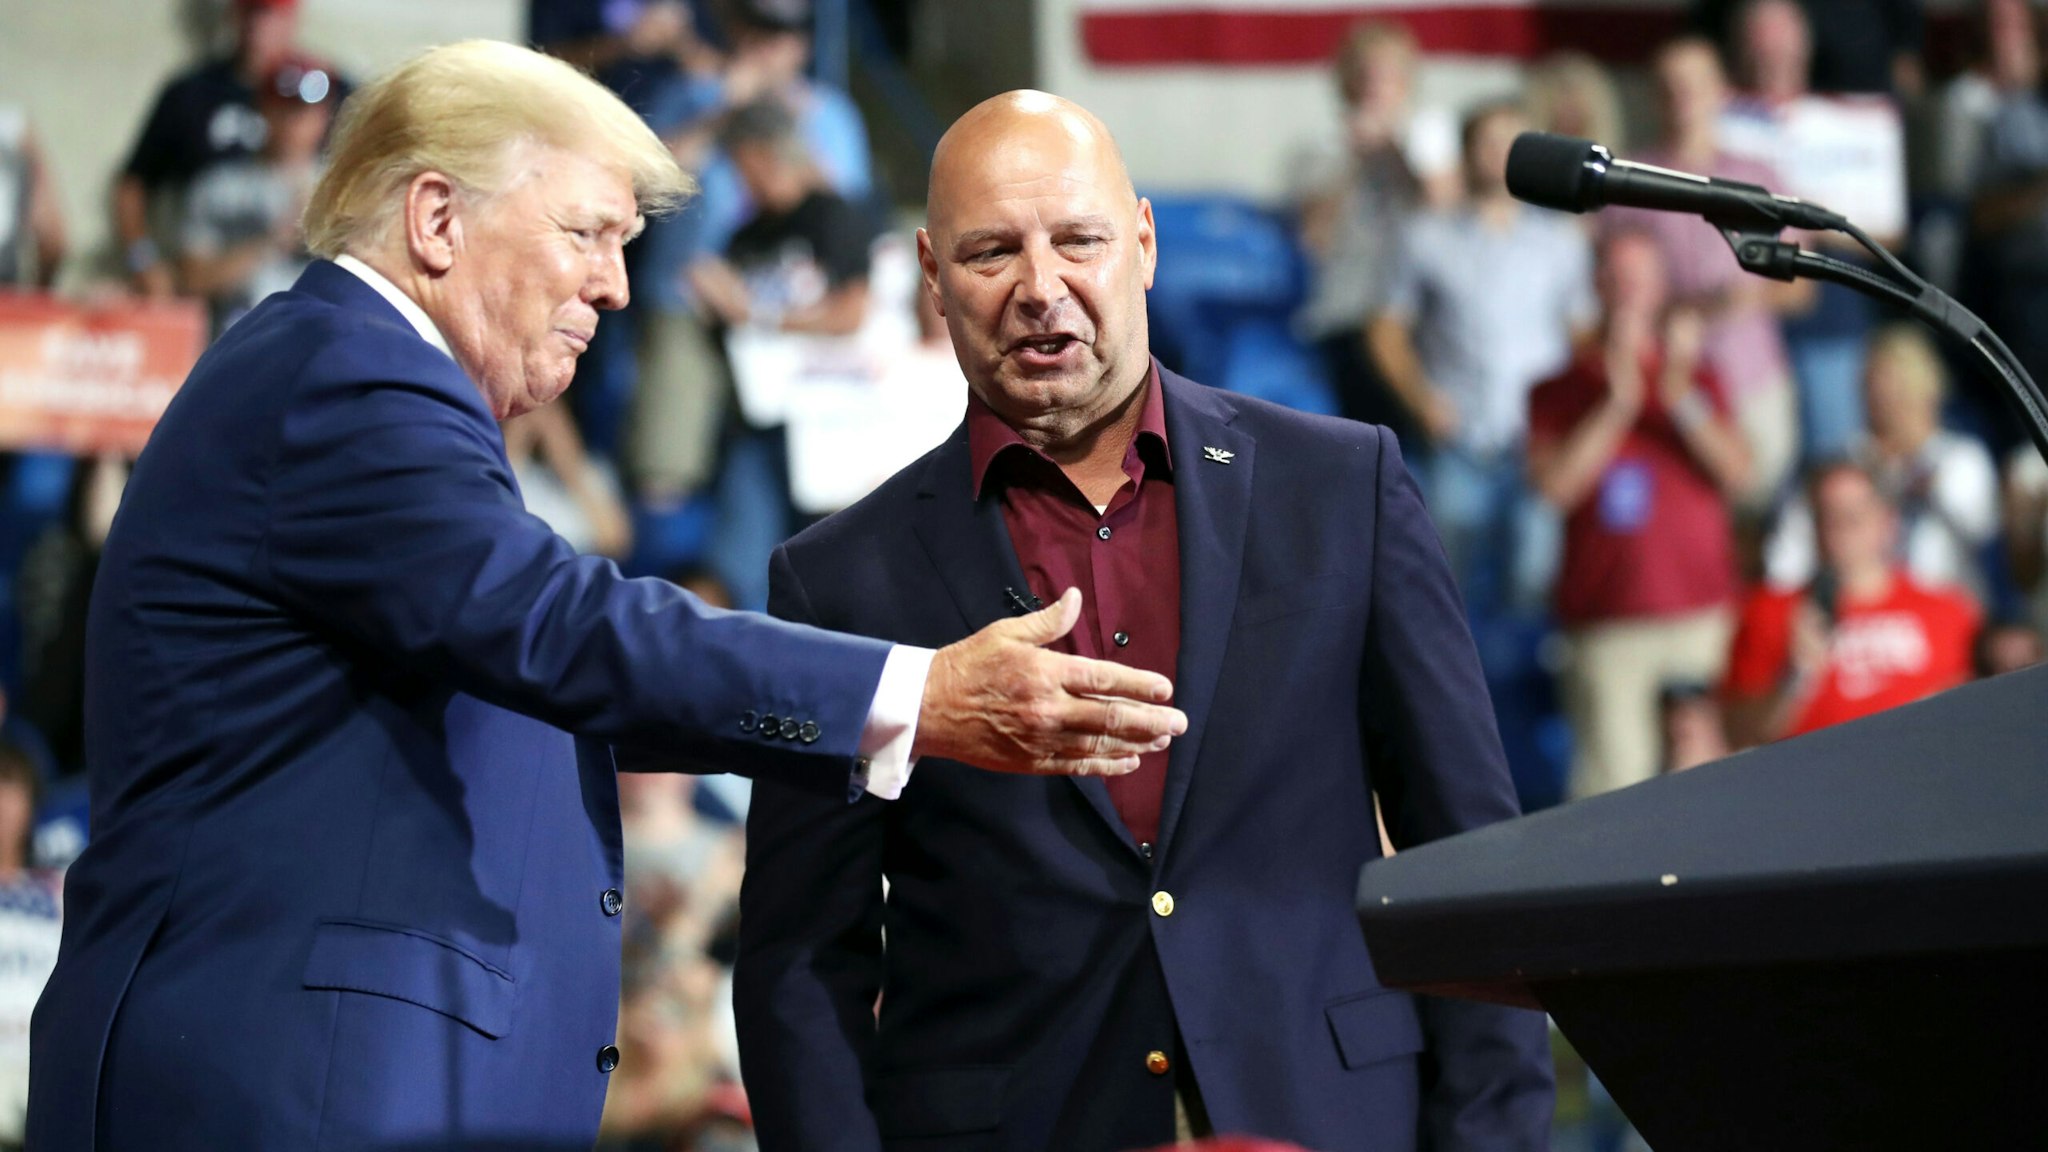 WILKES-BARRE, PENNSYLVANIA - SEPTEMBER 03: Pennsylvania Republican gubernatorial candidate Doug Mastriano is greeted by former president Donald Trump at a rally to support local candidates at the Mohegan Sun Arena on September 03, 2022 in Wilkes-Barre, Pennsylvania. Trump still denies that he lost the election against President Joe Biden and has encouraged his supporters to doubt the election process. Trump has backed Senate candidate Mehmet Oz and gubernatorial hopeful Doug Mastriano.